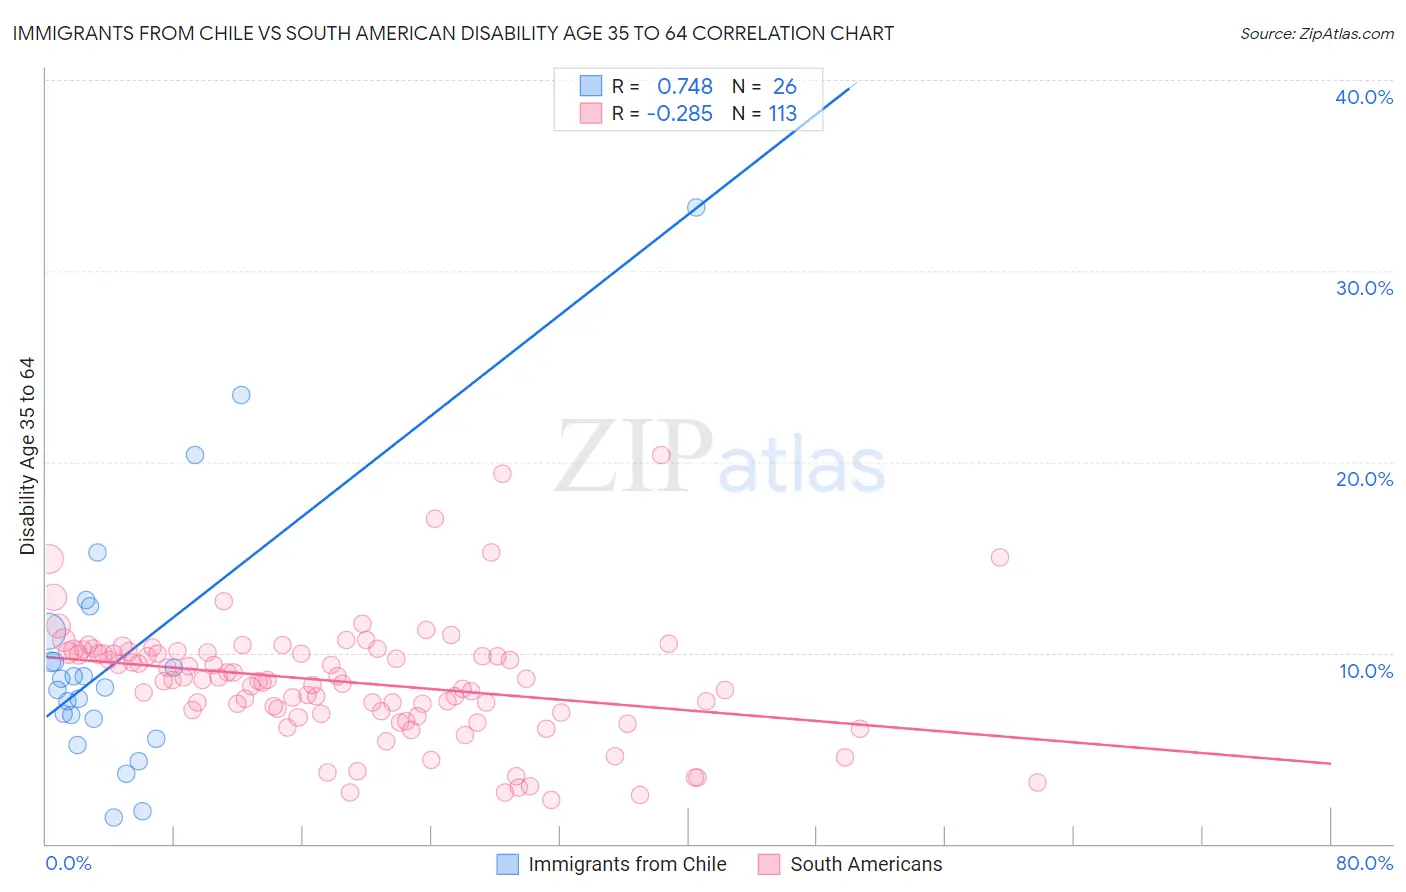 Immigrants from Chile vs South American Disability Age 35 to 64